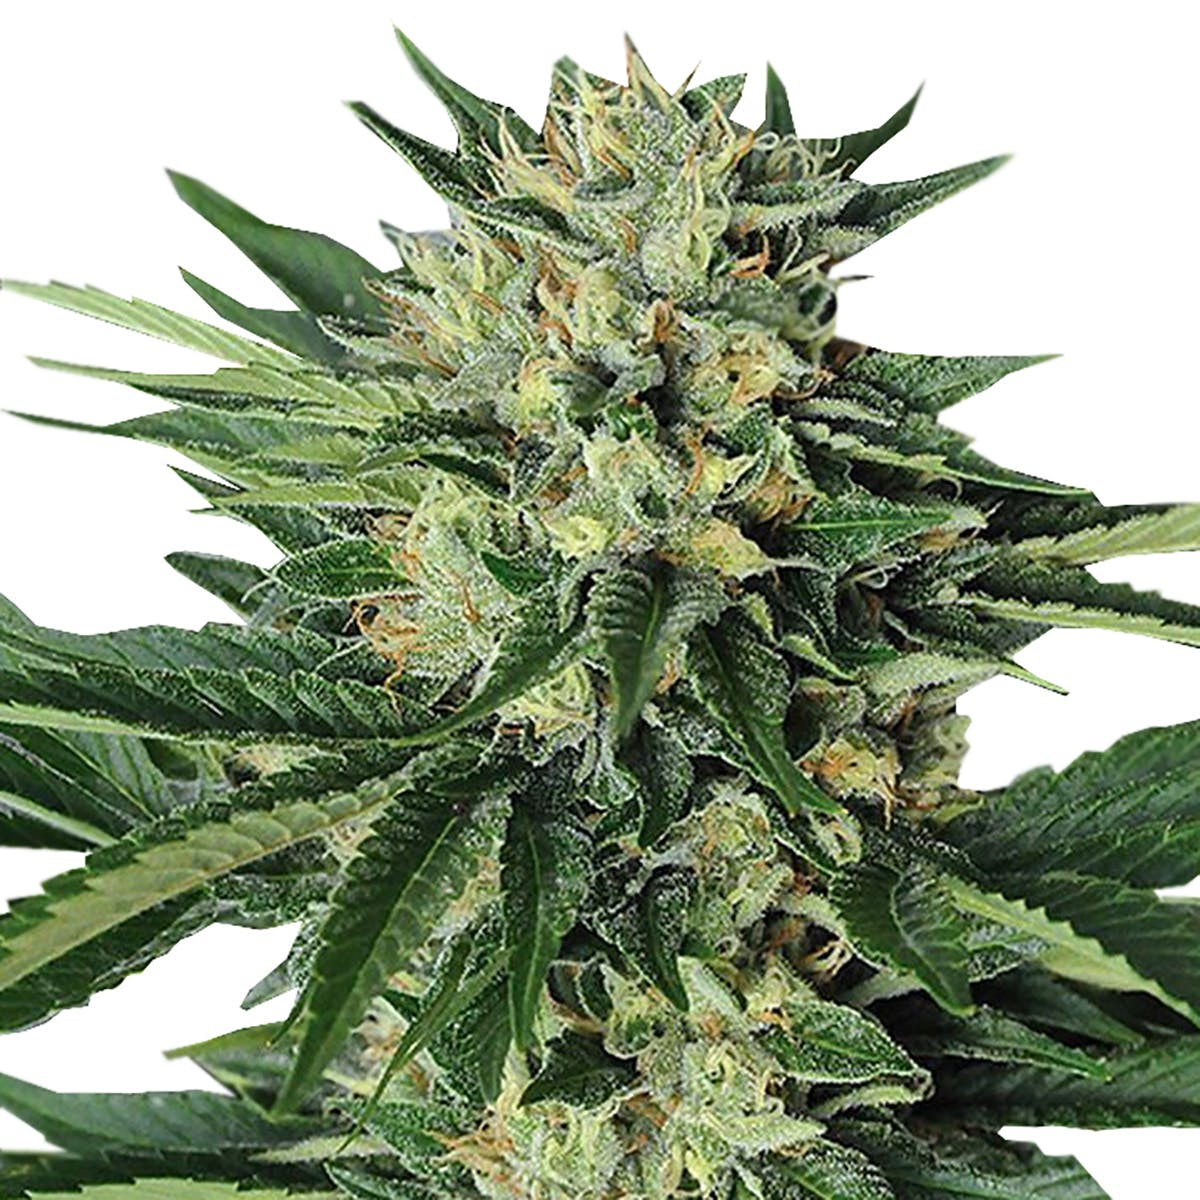 seed-humboldt-seed-organization-dr-greenthumba-c2-80-c2-99s-em-dog-by-b-real